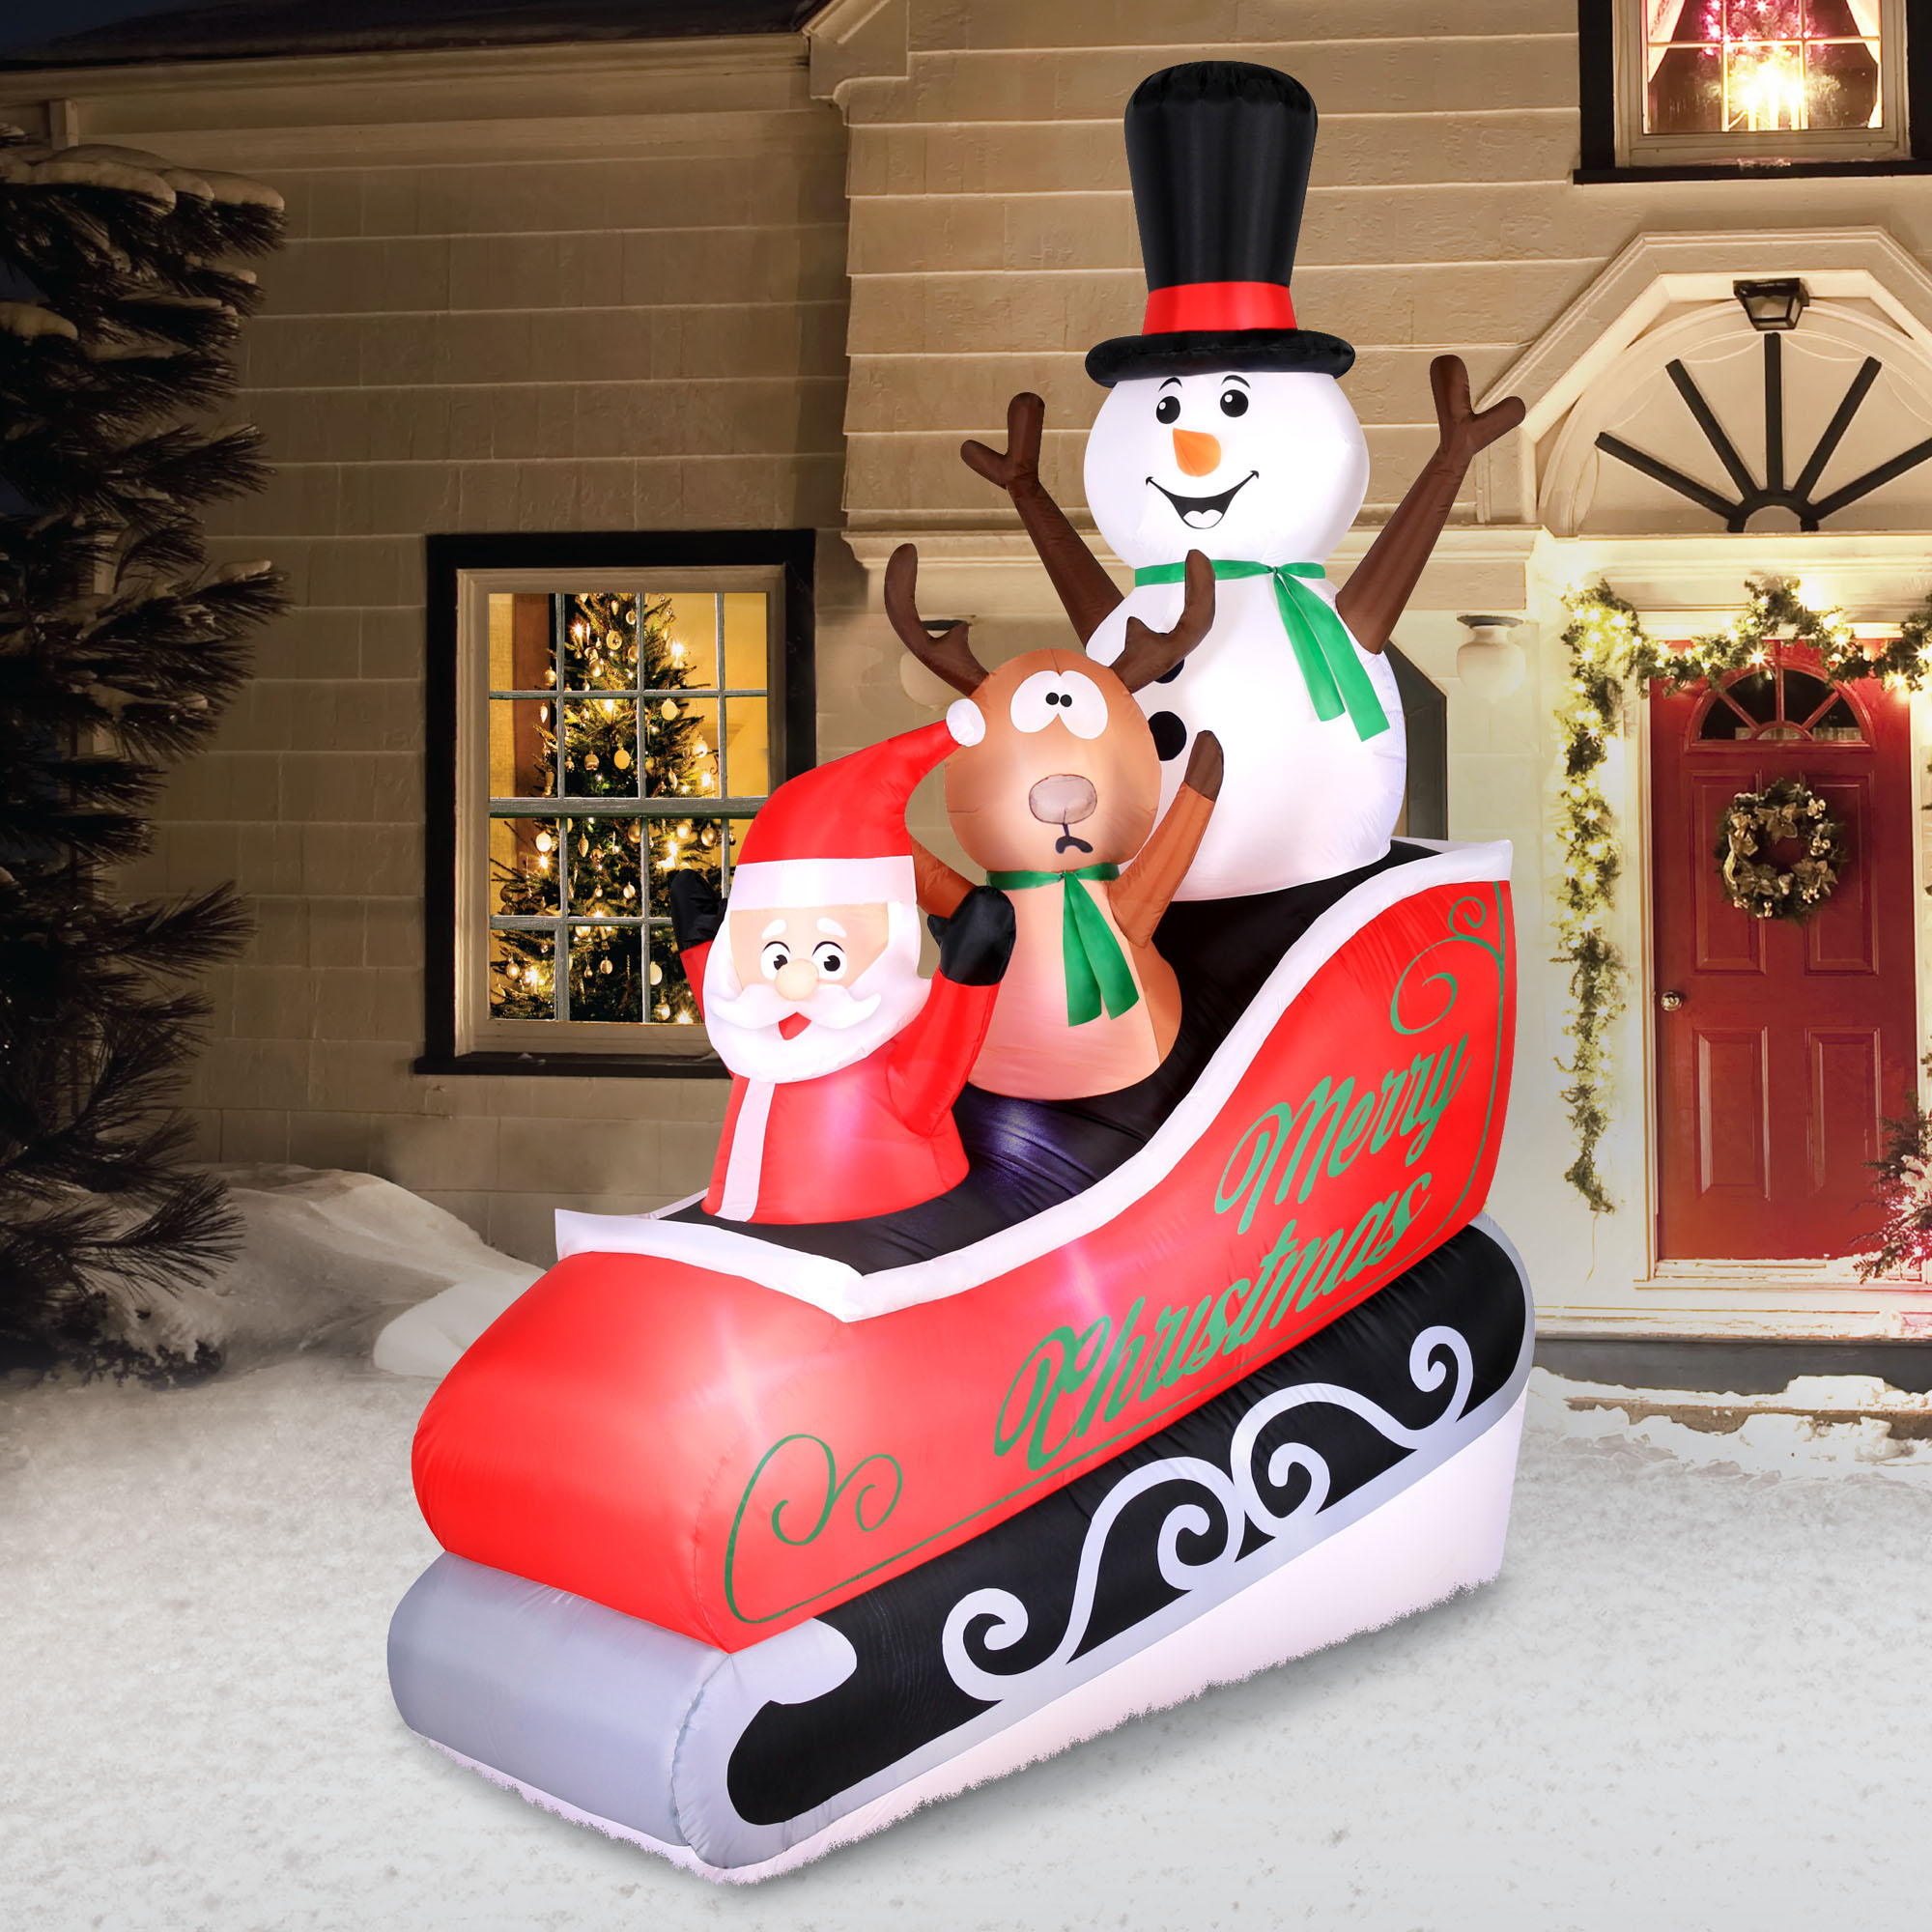 Occasions AIRFLOWZ INFLATABLE SANTA SLEIGH RIDE 8FT, 8 ft Tall, Red ...